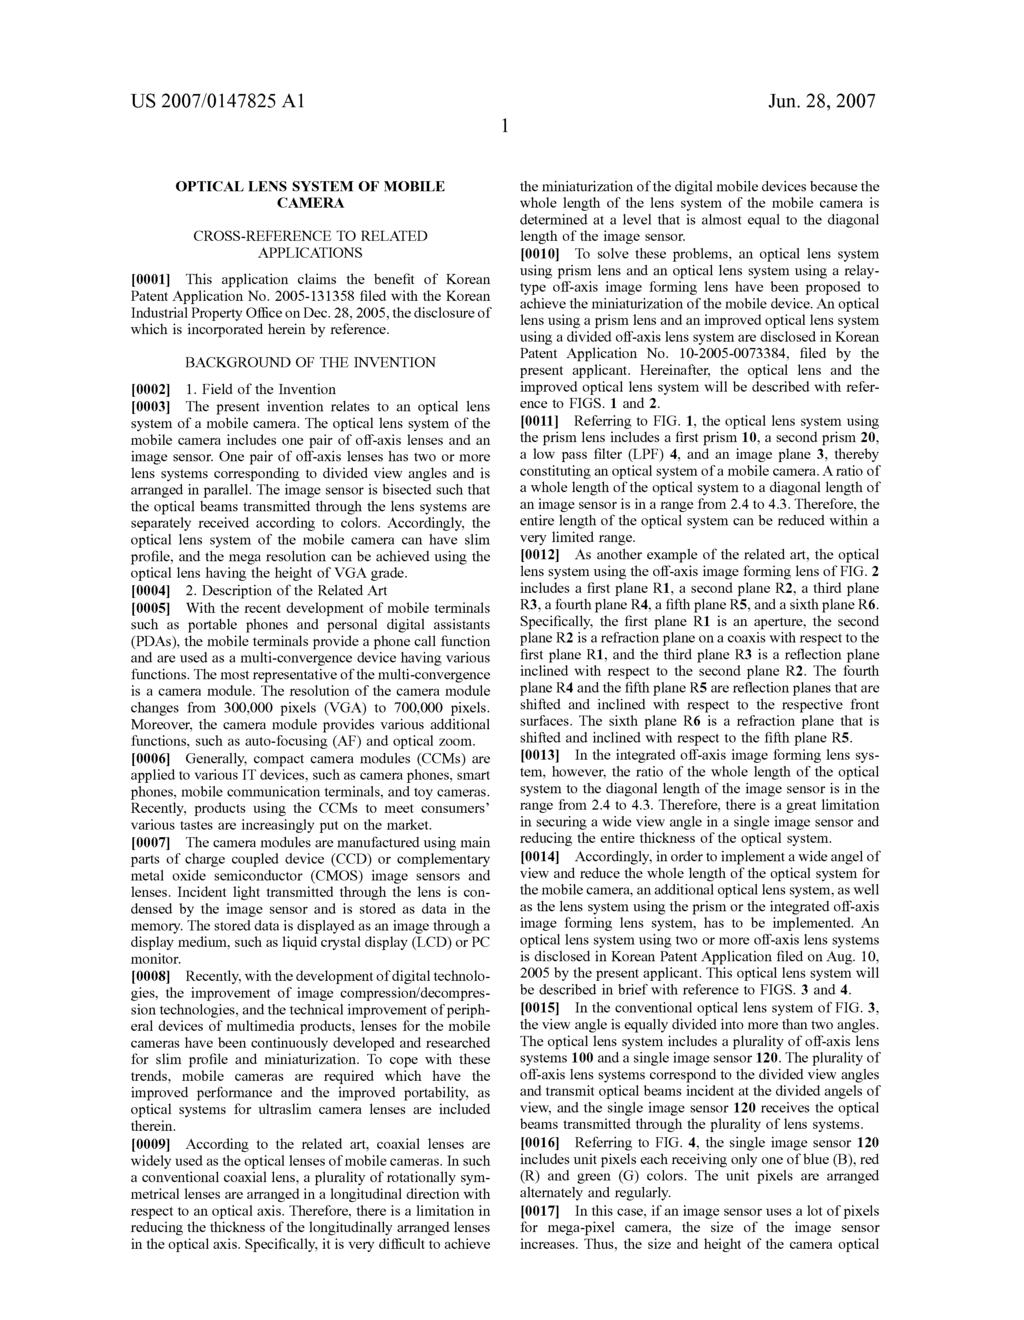 US 2007/0147825 A1 Jun. 28, 2007 OPTICAL LENS SYSTEM OF MOBILE CAMERA CROSS-REFERENCE TO RELATED APPLICATIONS 0001. This application claims the benefit of Korean Patent Application No.